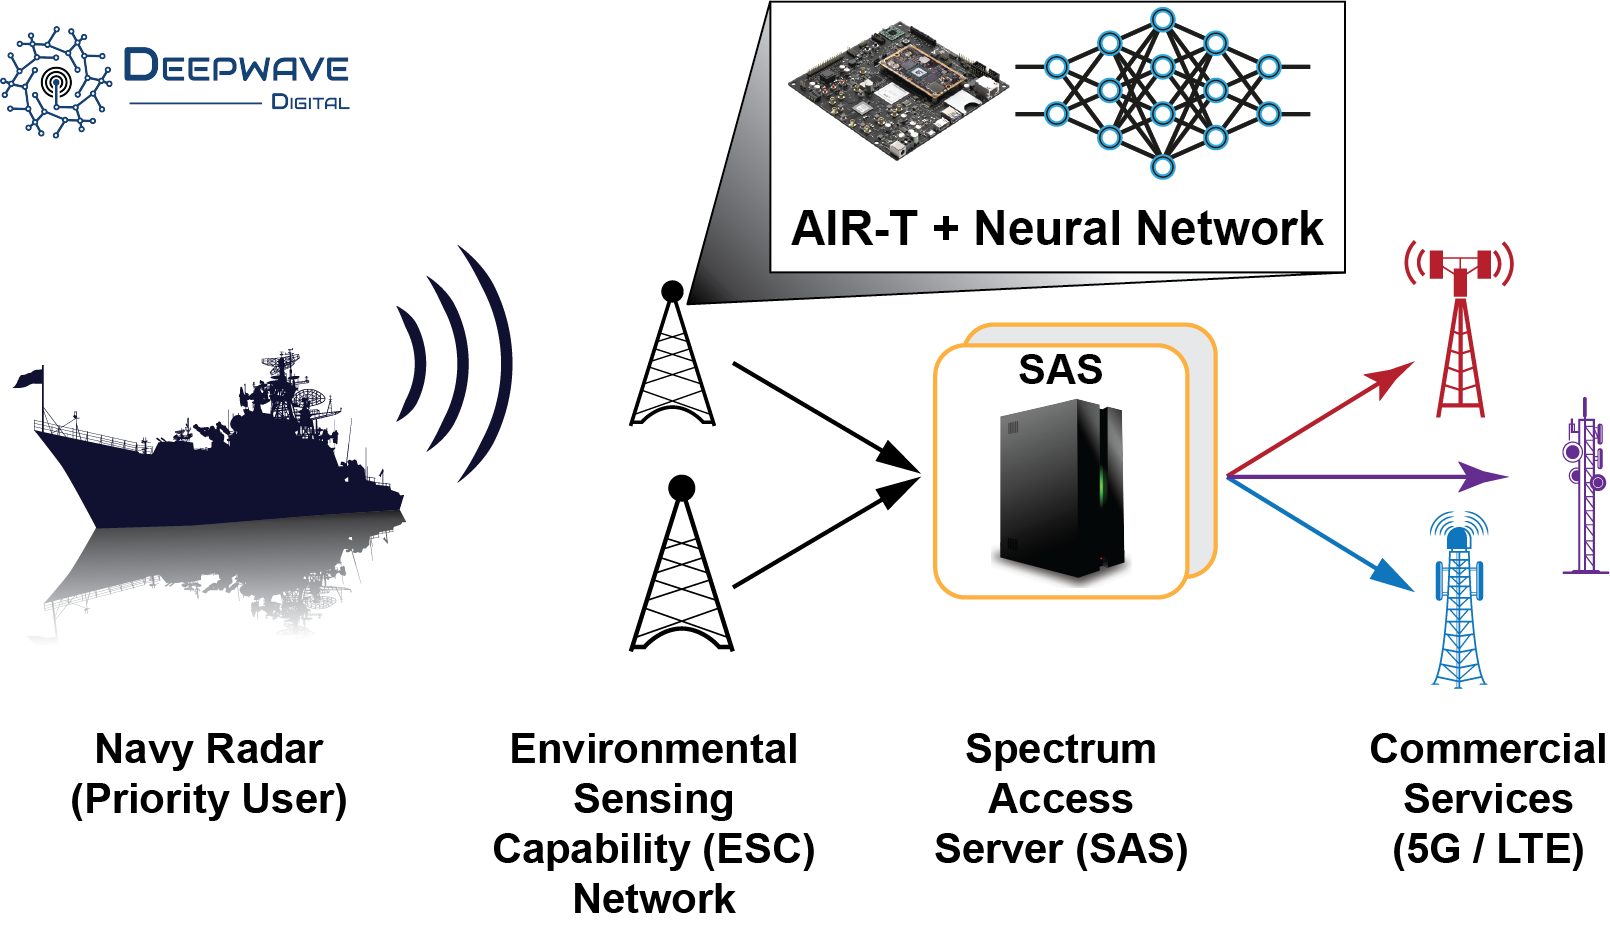 AIR-T and Neural Network for Citizens Broadband Radio Service